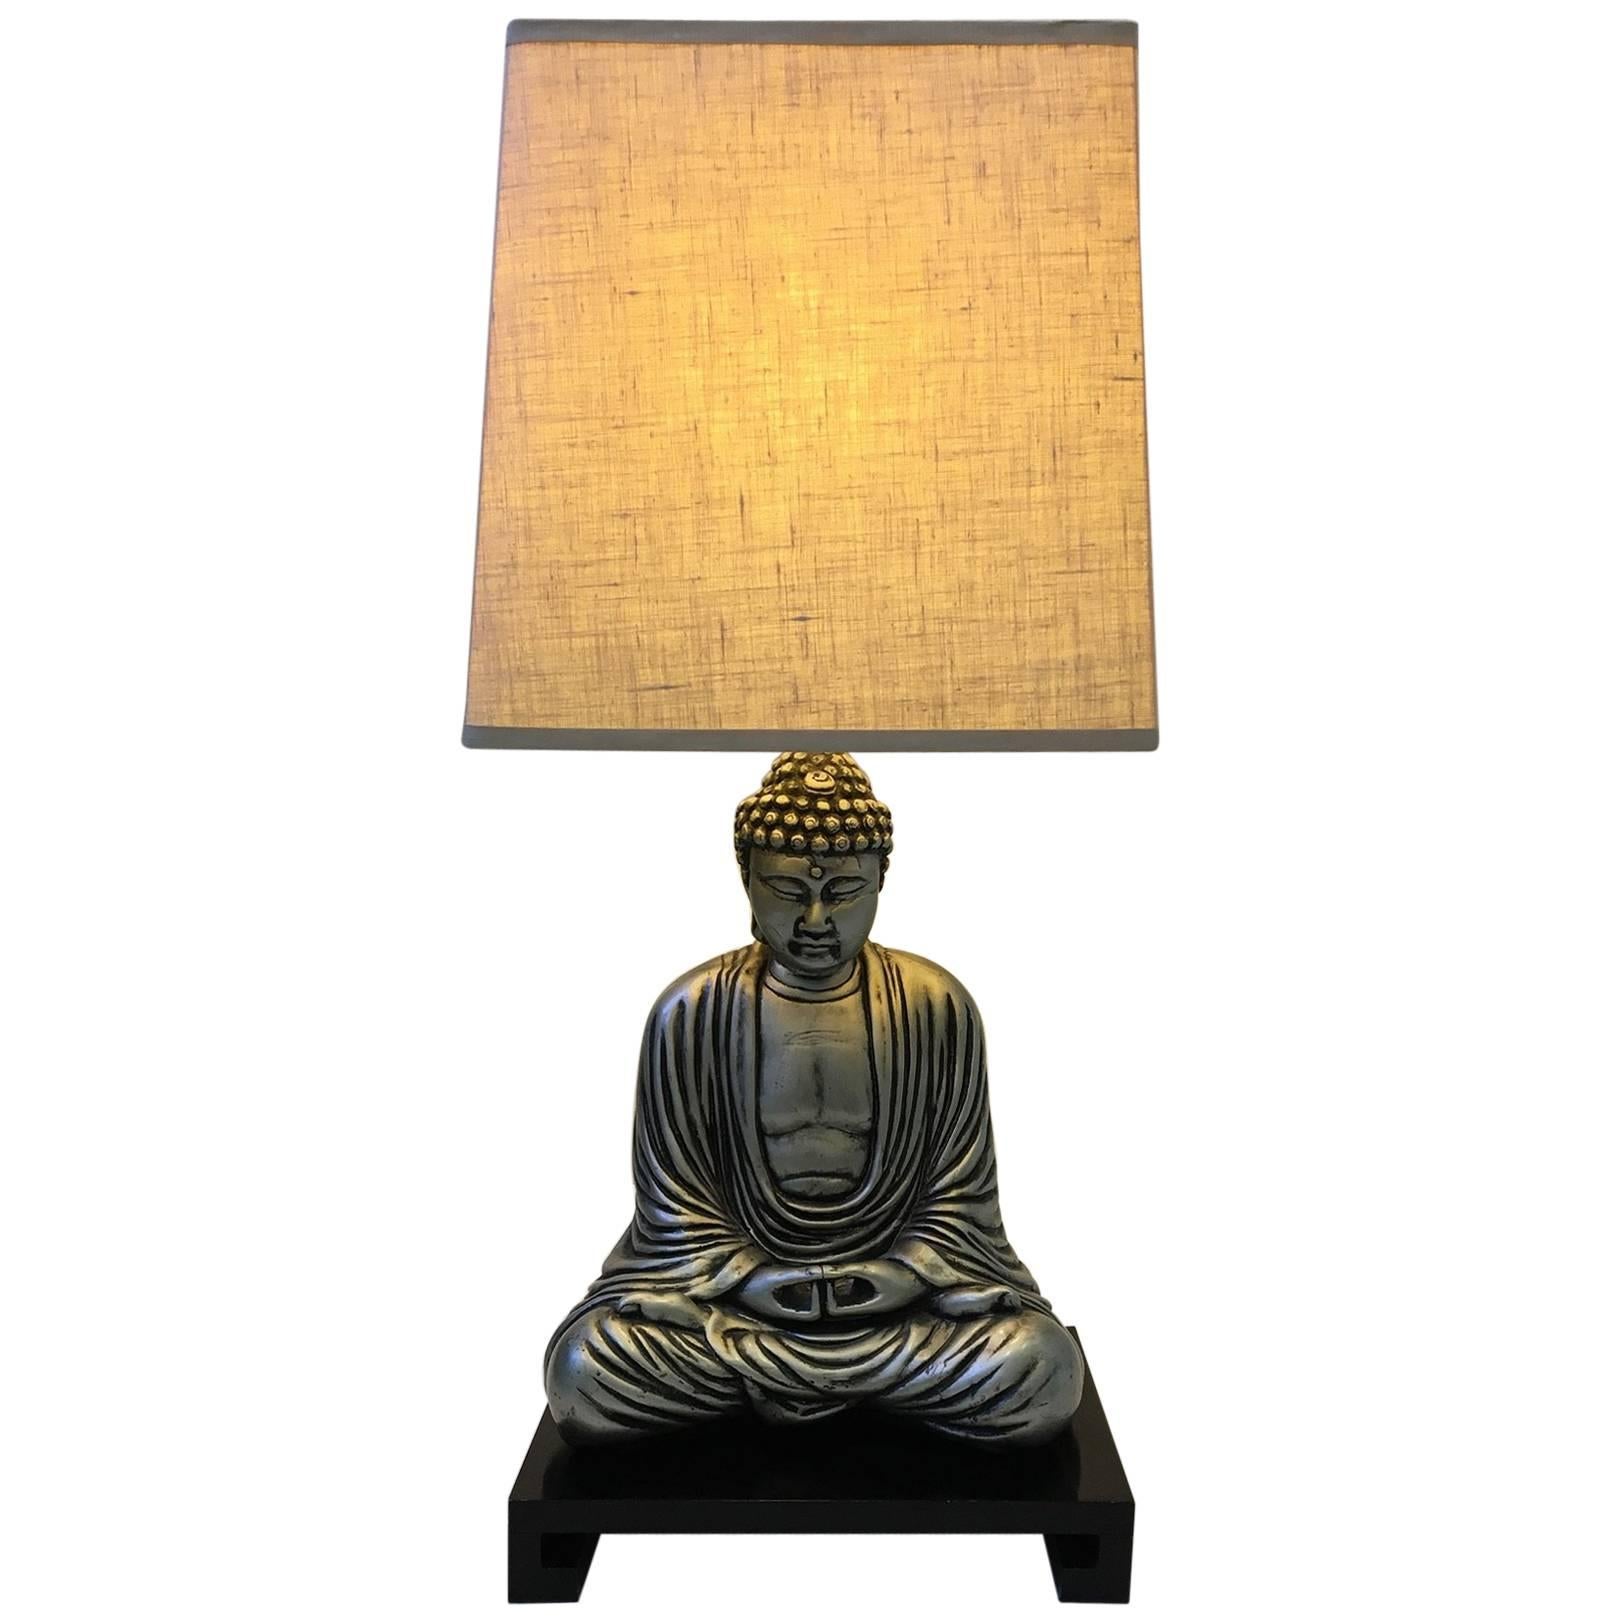 Silver and Black Lacquered Buddha Table Lamp in the Style of James Mont